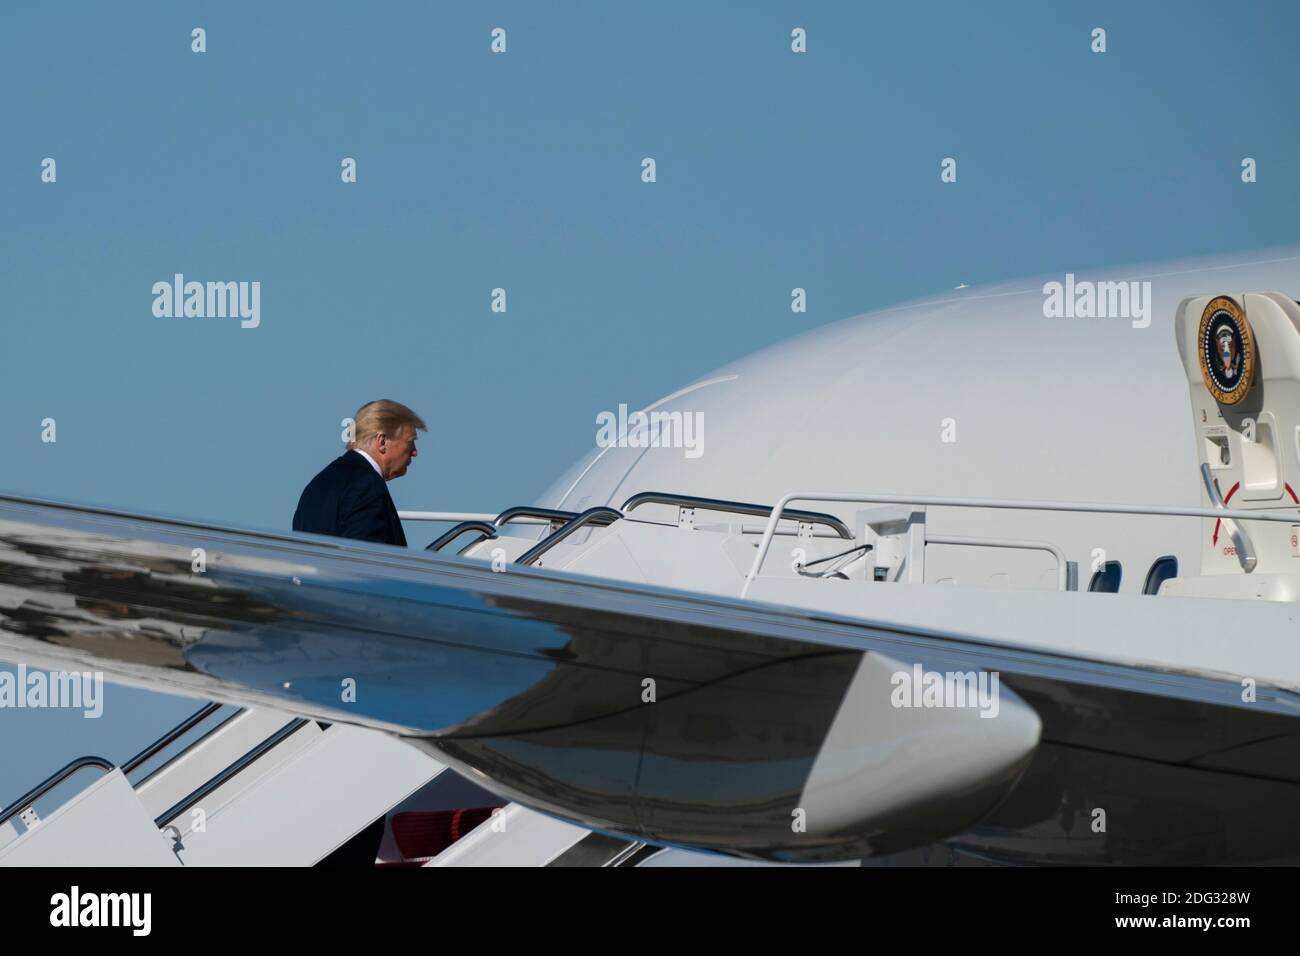 U.S. President Donald Trump boards Air Force One at Joint Base Andrews in Maryland, U.S., on Saturday, Oct. 17, 2020. Trump is expected to make multiple campaign stops on the West coast over the next few days, resting over night in Las Vegas, Nevada. Credit: Alex Edelman/The Photo Access Stock Photo